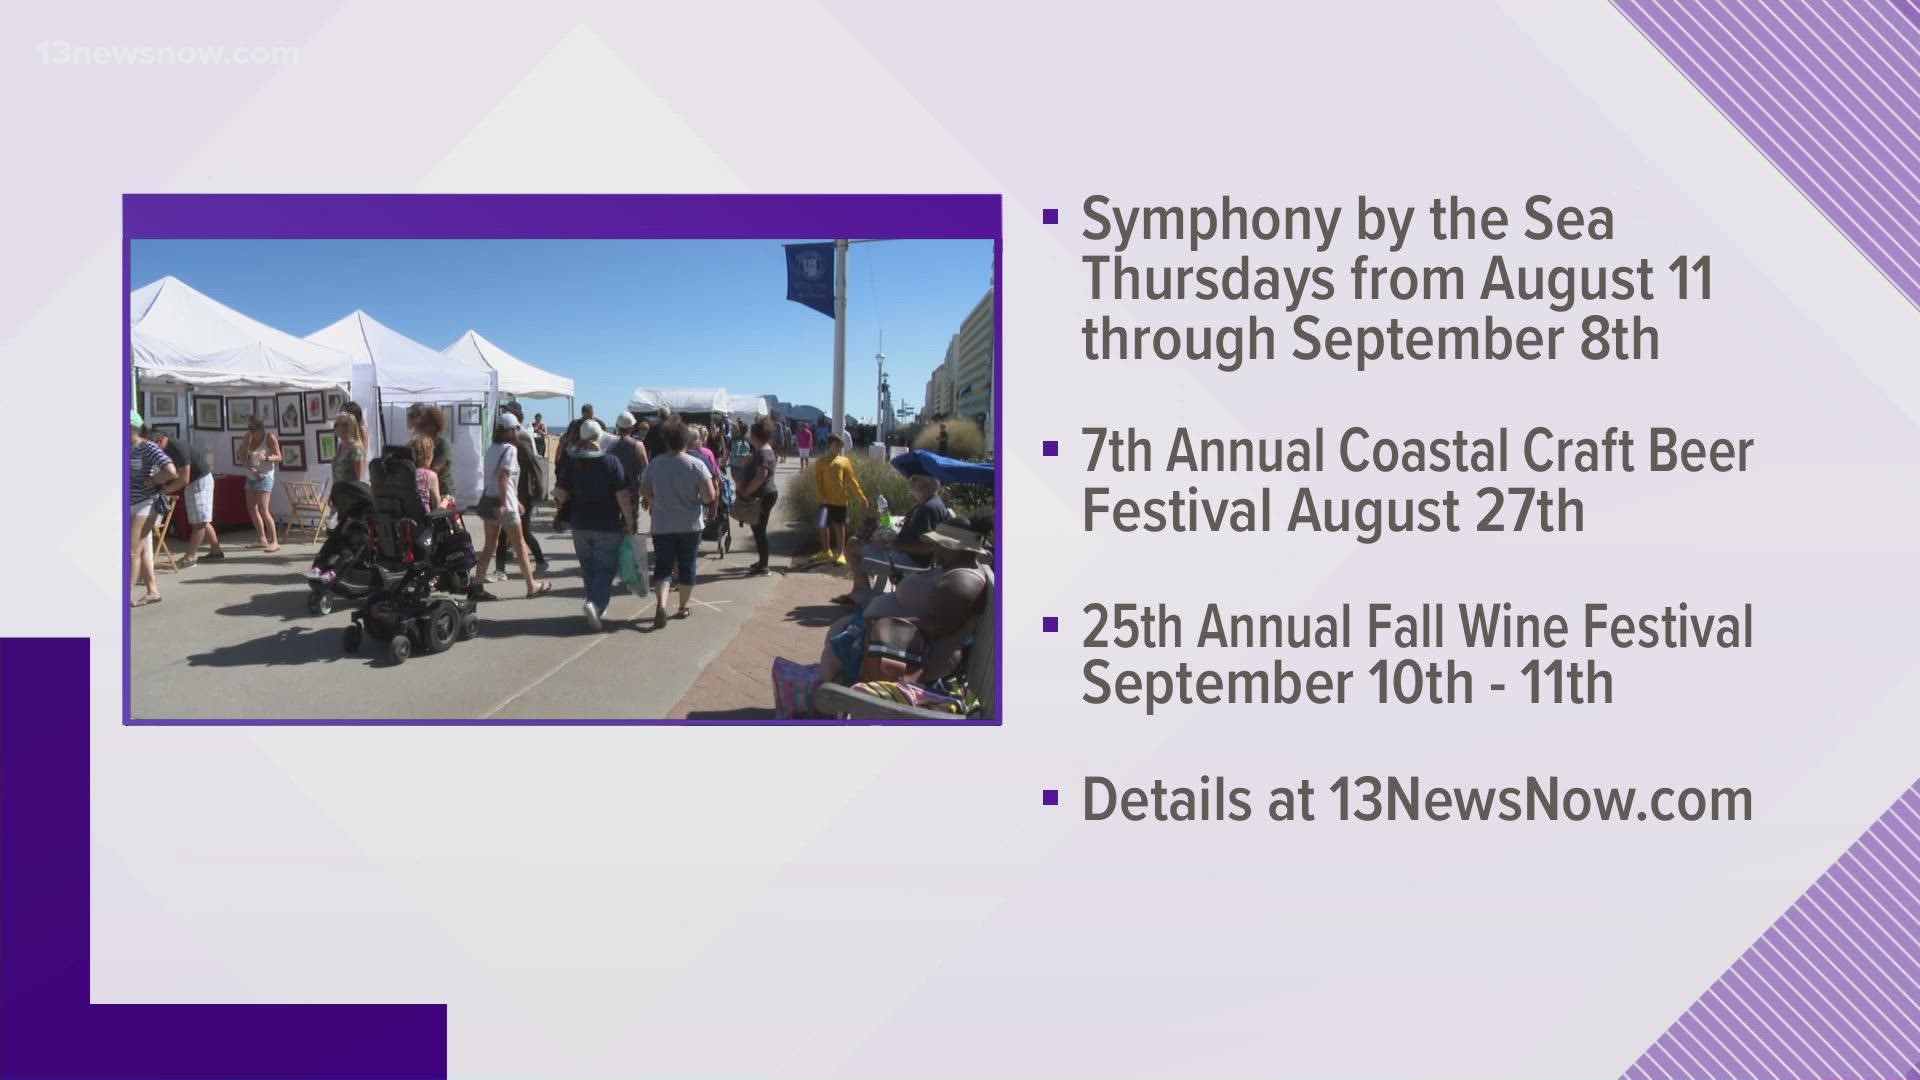 Neptune Festival events will start in mid-August and culminate at the end of September with its  Boardwalk weekend.